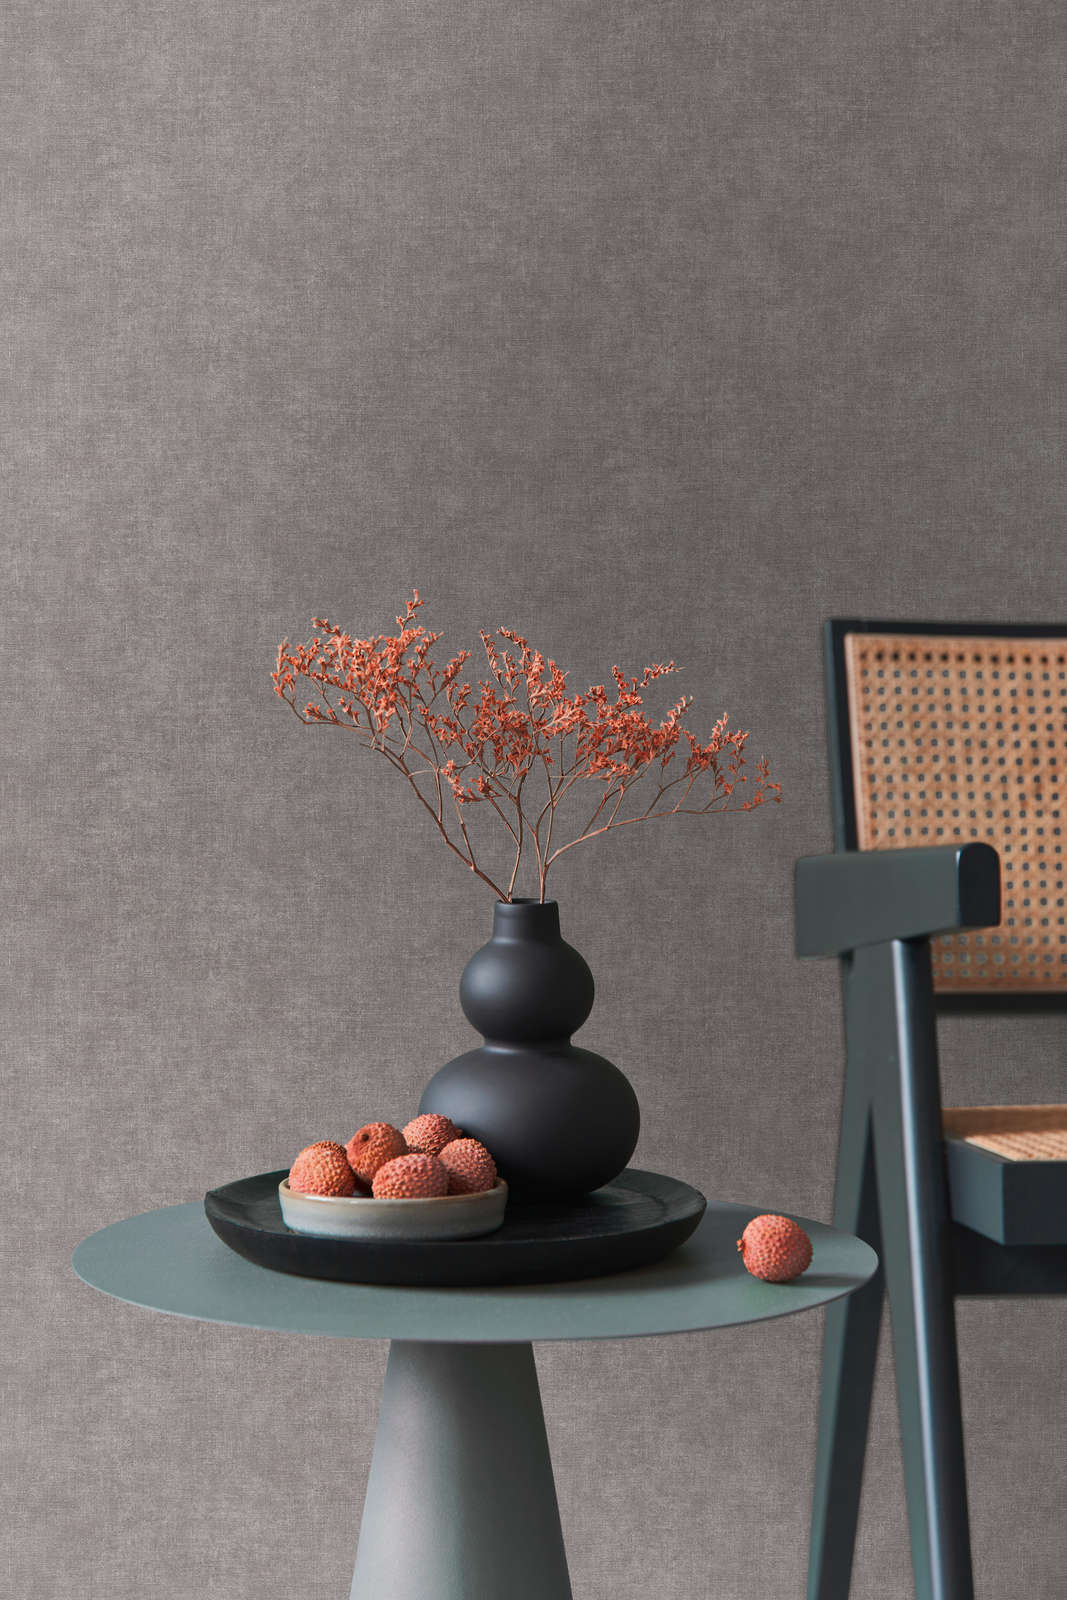             Plain wallpaper in plaster look with light texture - grey
        